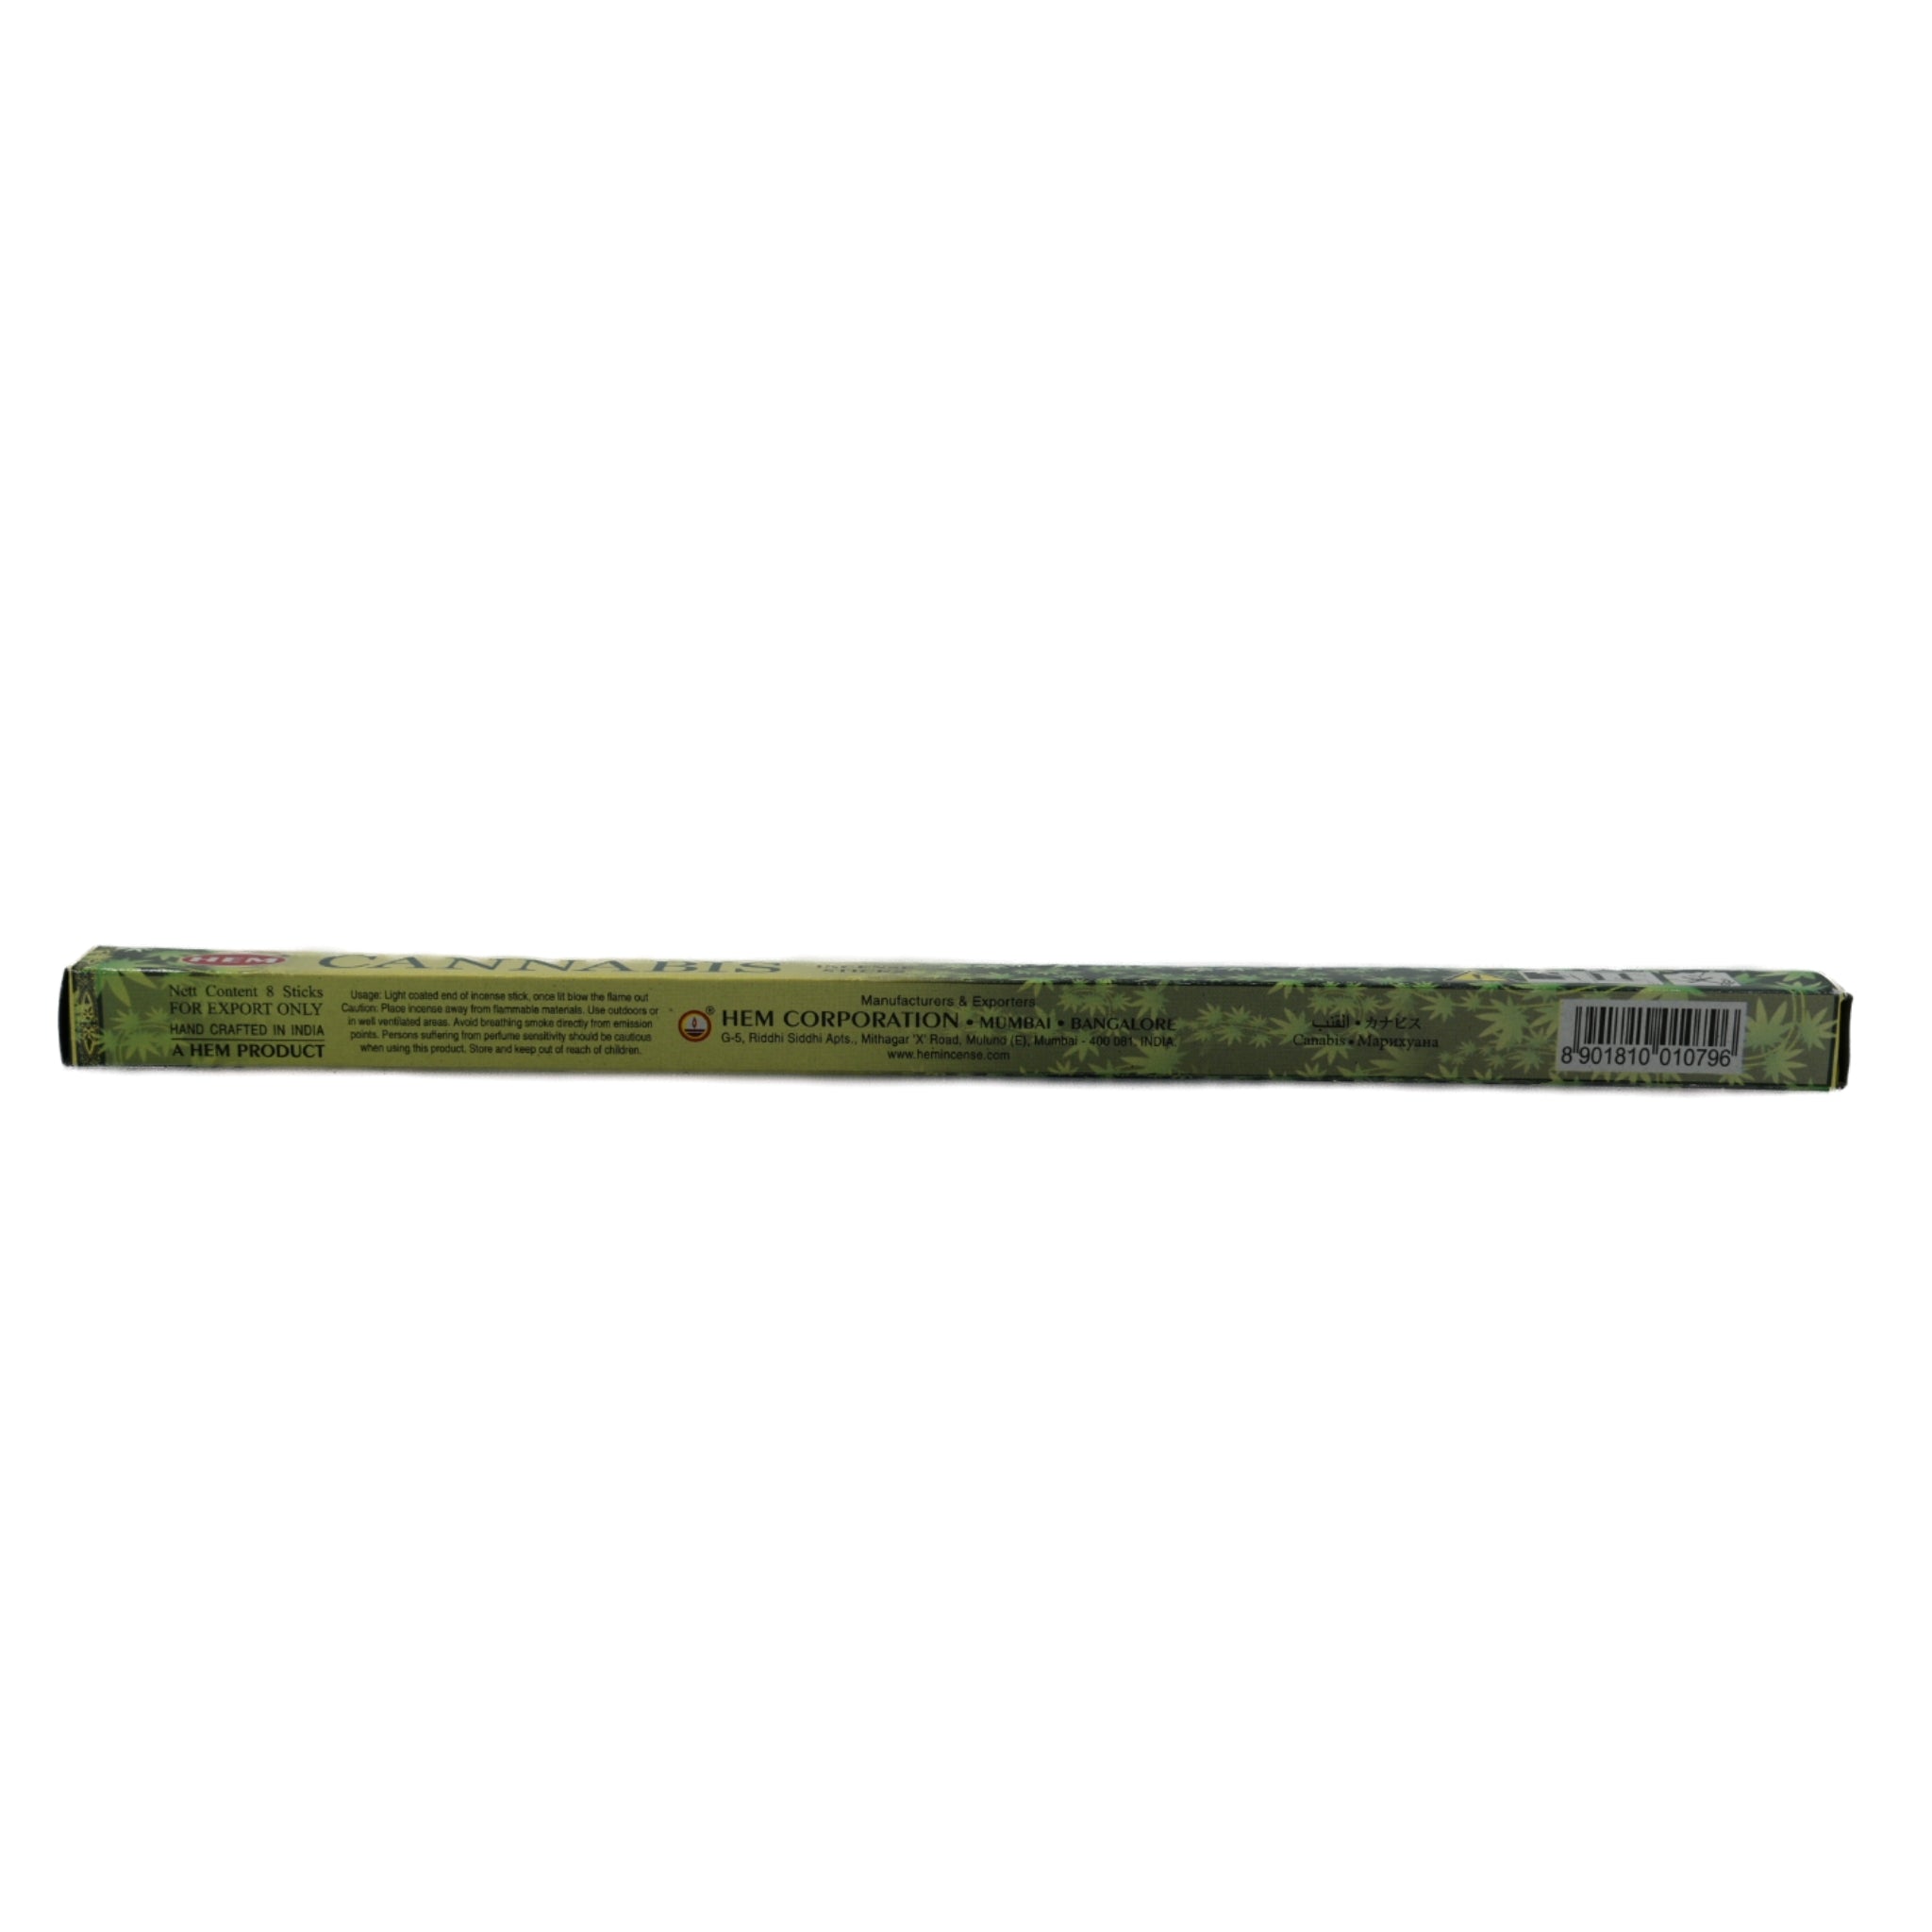 Cannabis Incense Stick Back view of box.